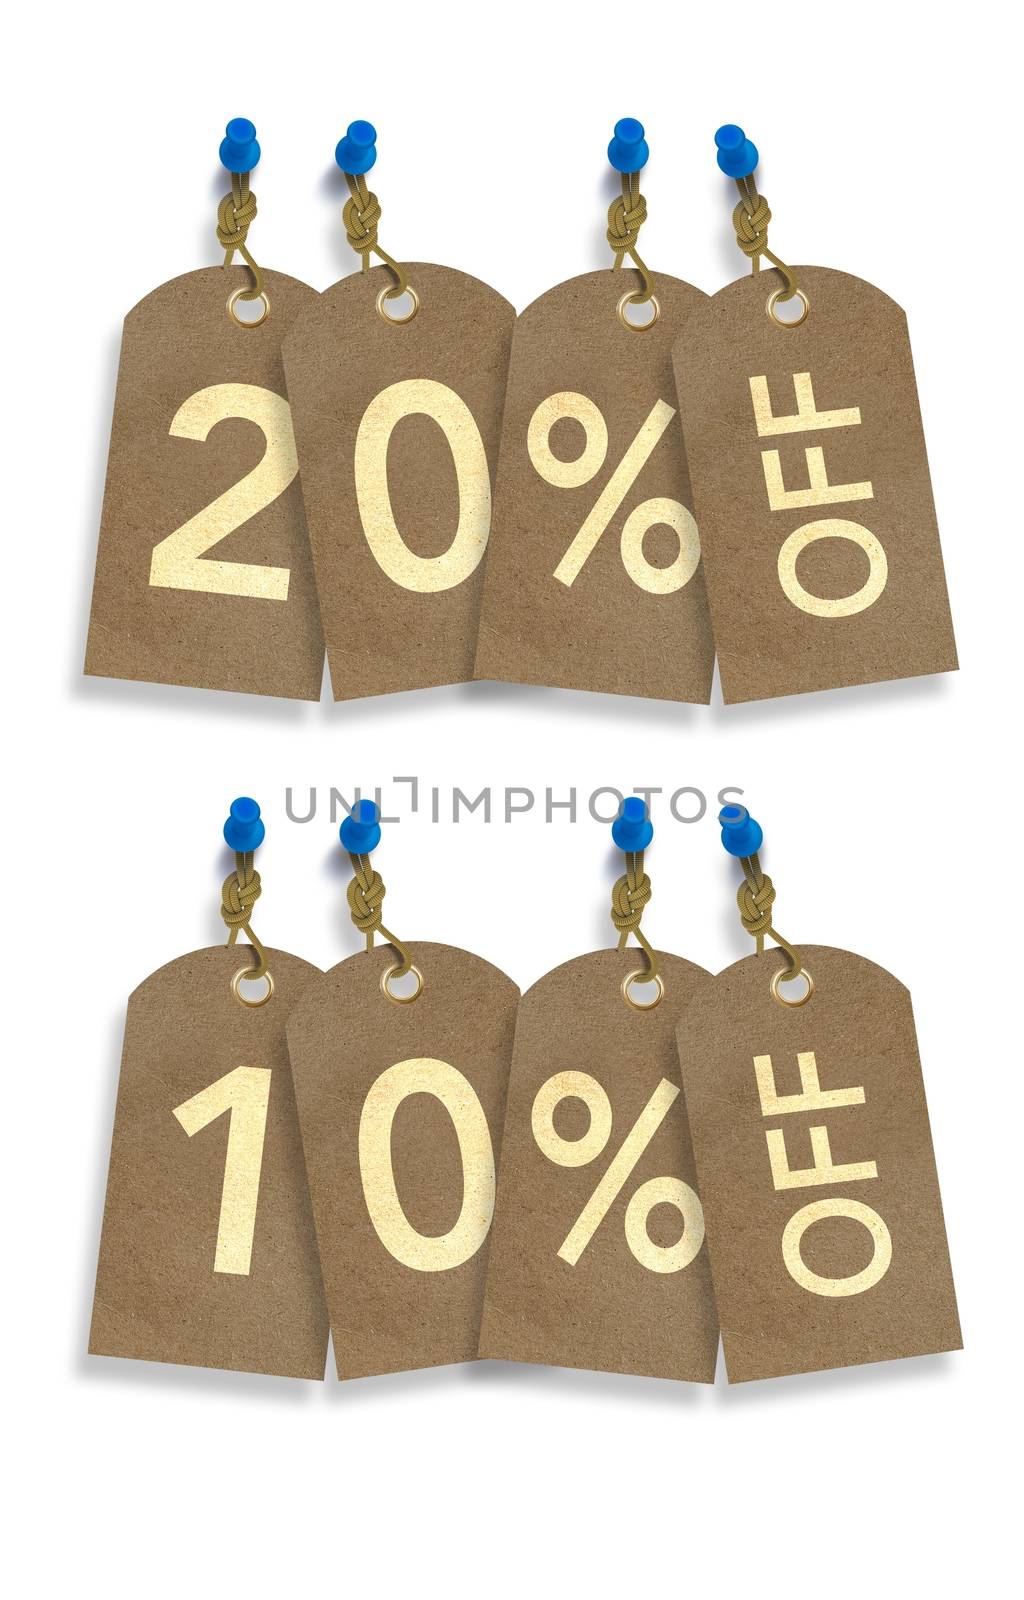 Special Sale Paper Tags Isolated on White. 10% and 20% Off Discount Tags Illustration.